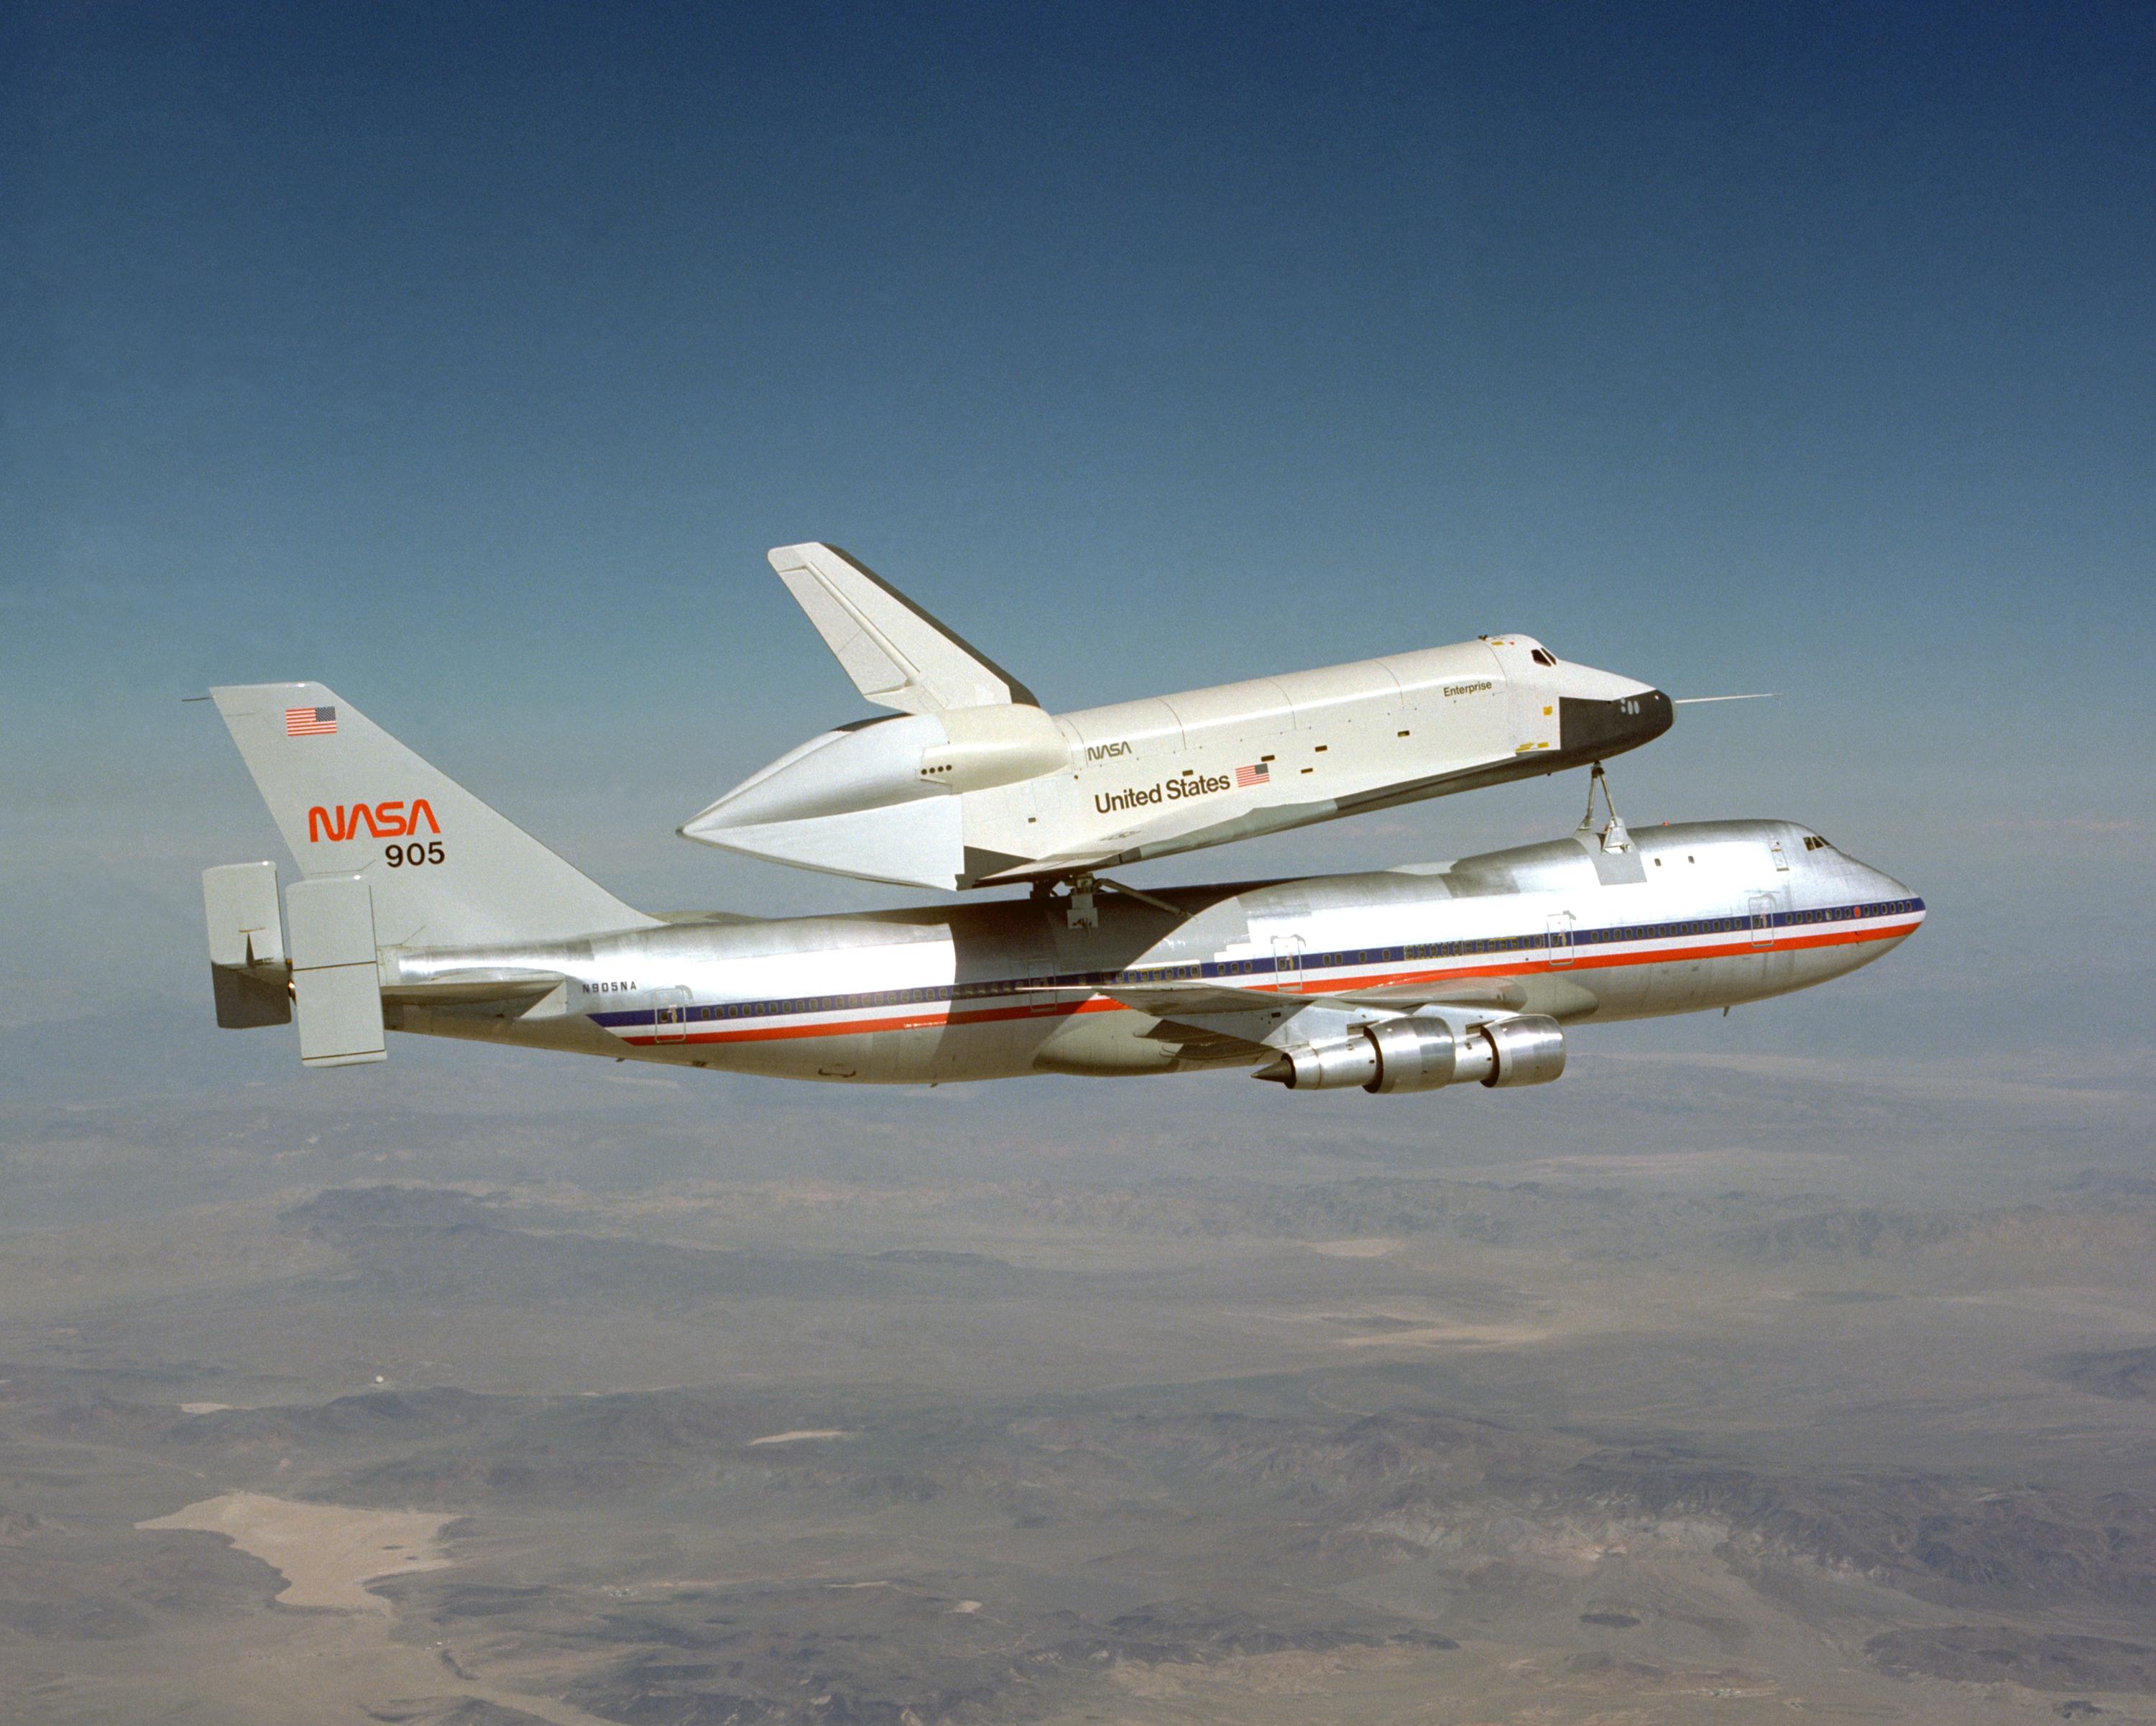 Space Shuttle Prototype Approach and Landing Tests Image Gallery | NASA